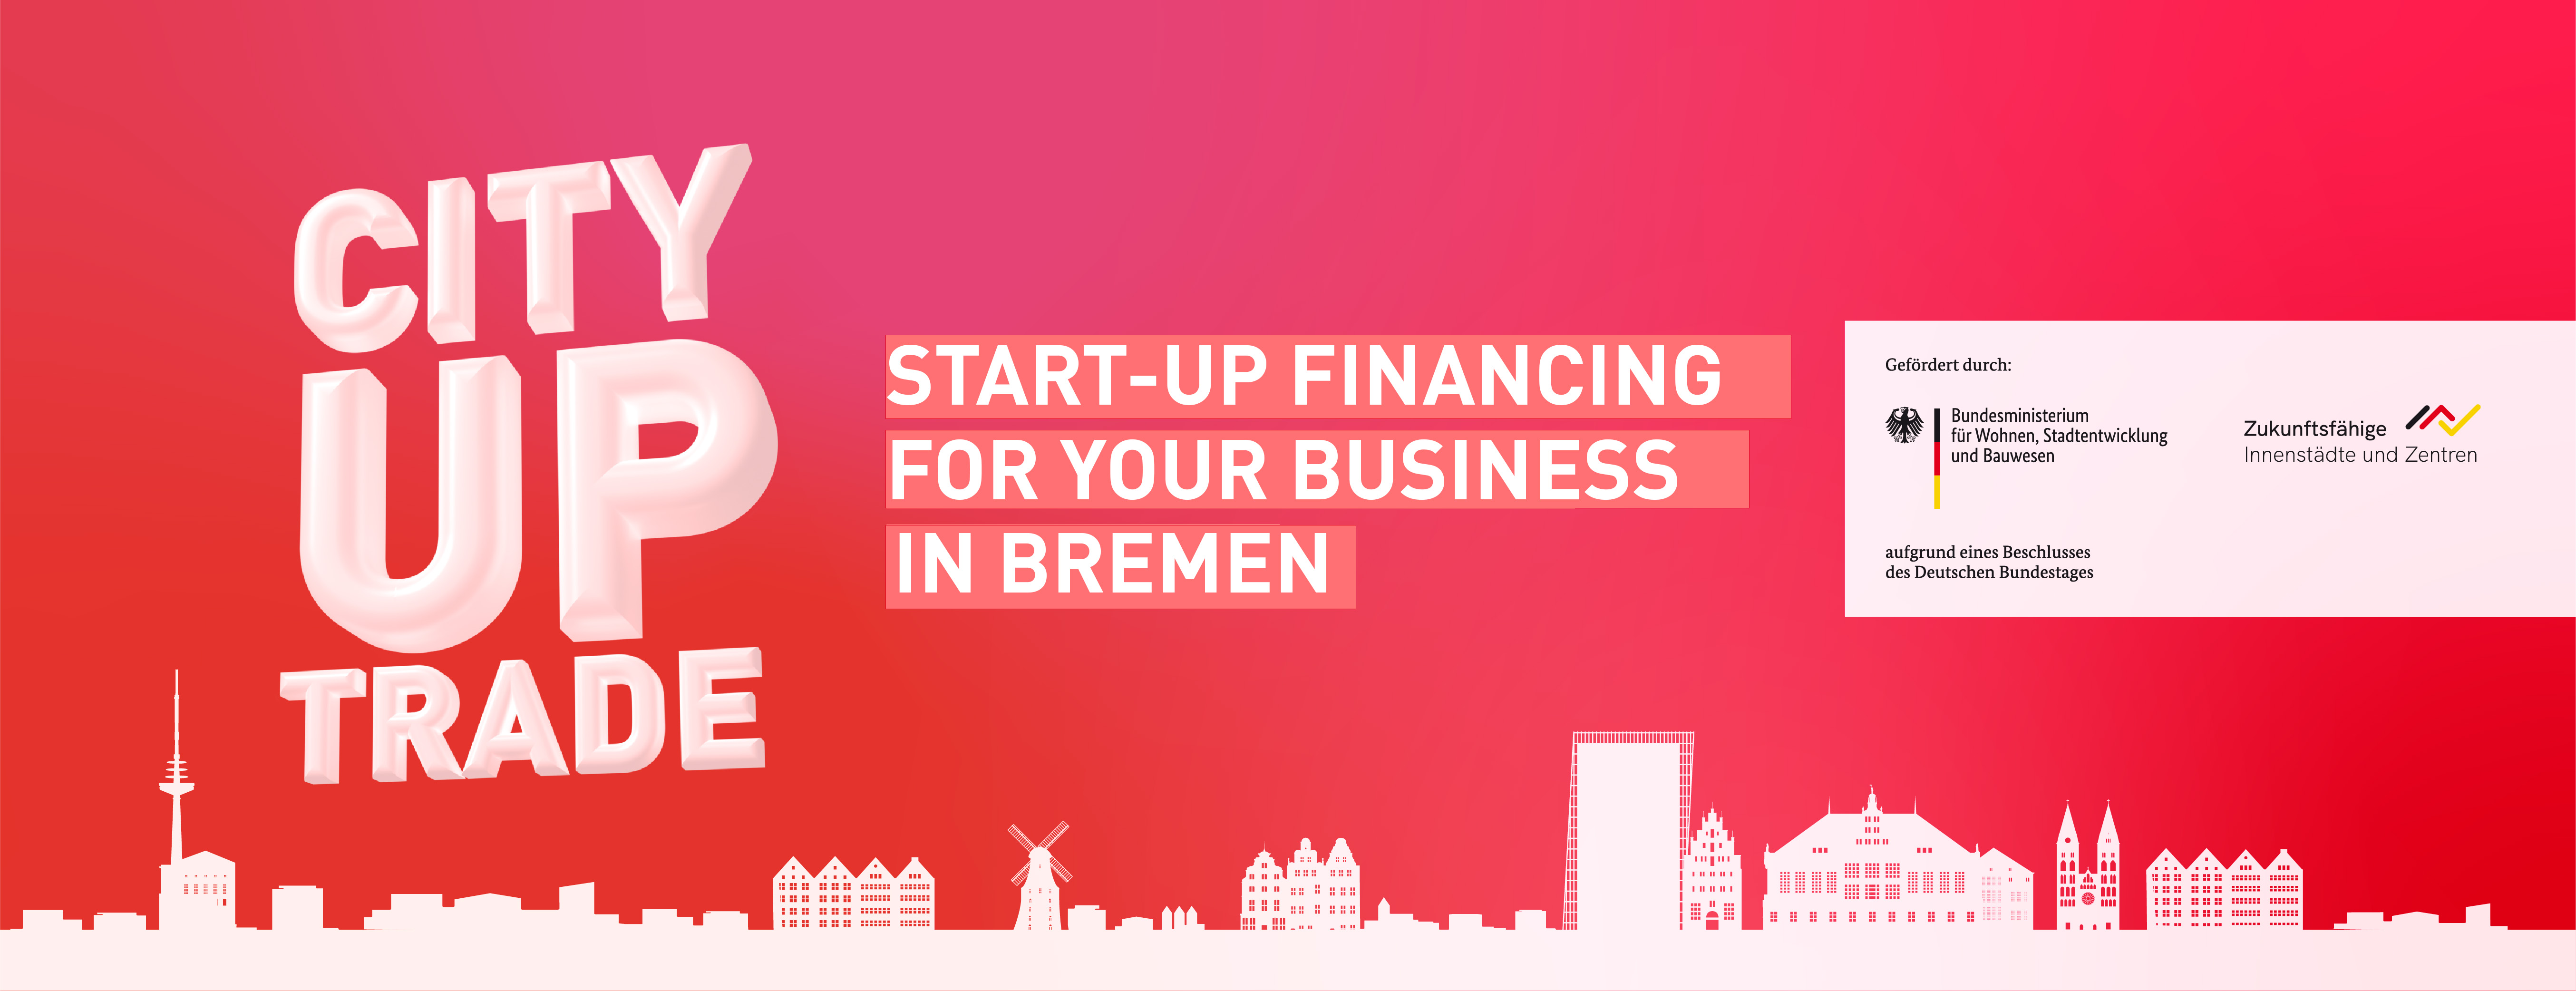 City Up Trade  start-up financing for your business in Bremen - Quelle: WFB